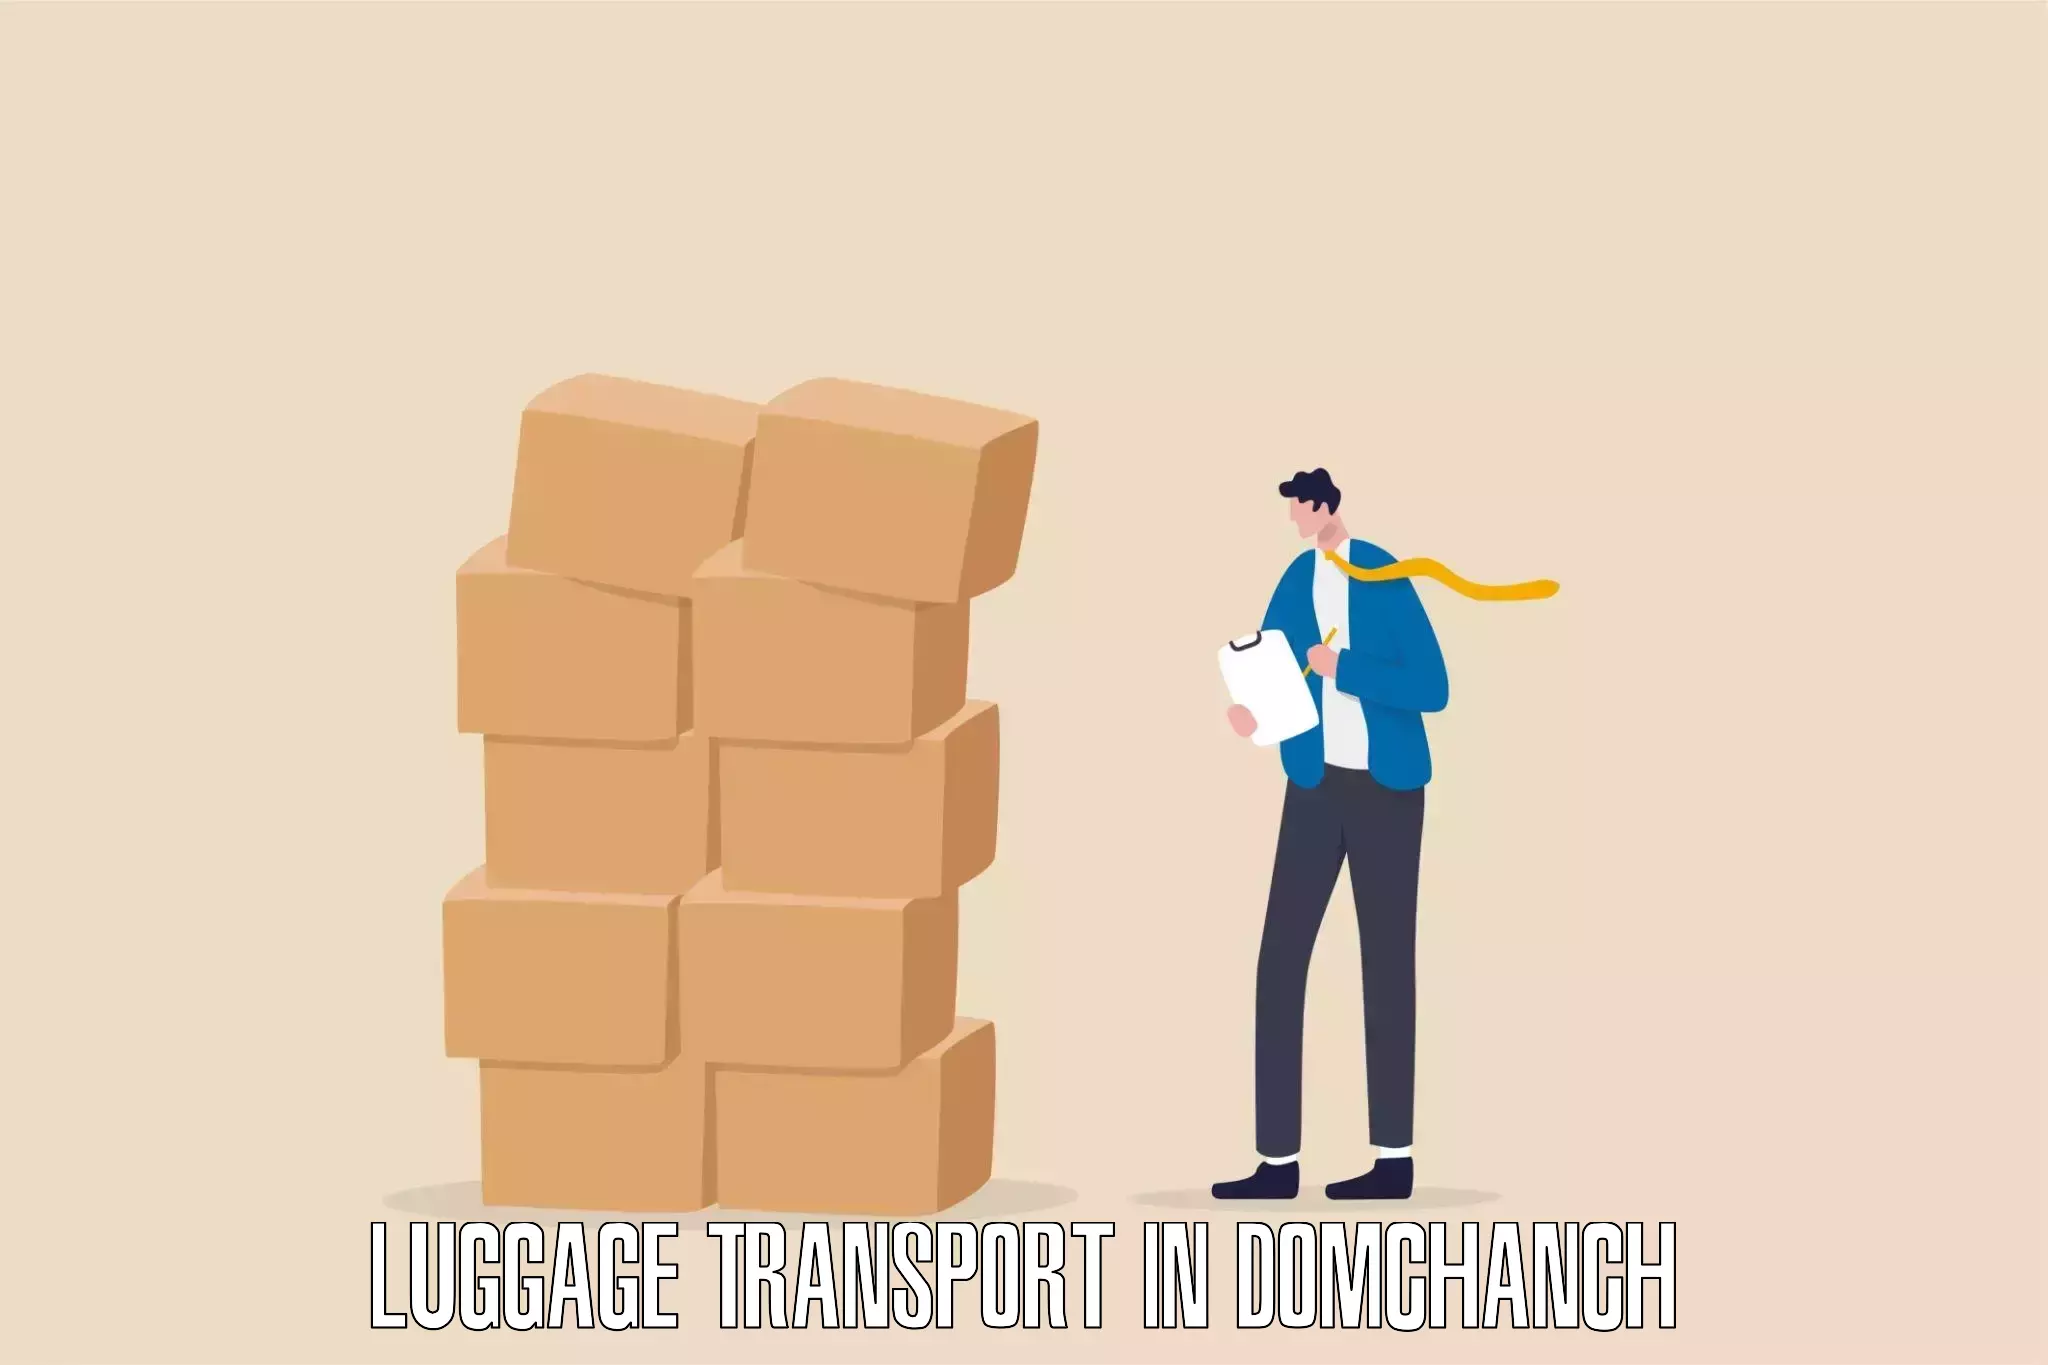 Luggage shipping discounts in Domchanch